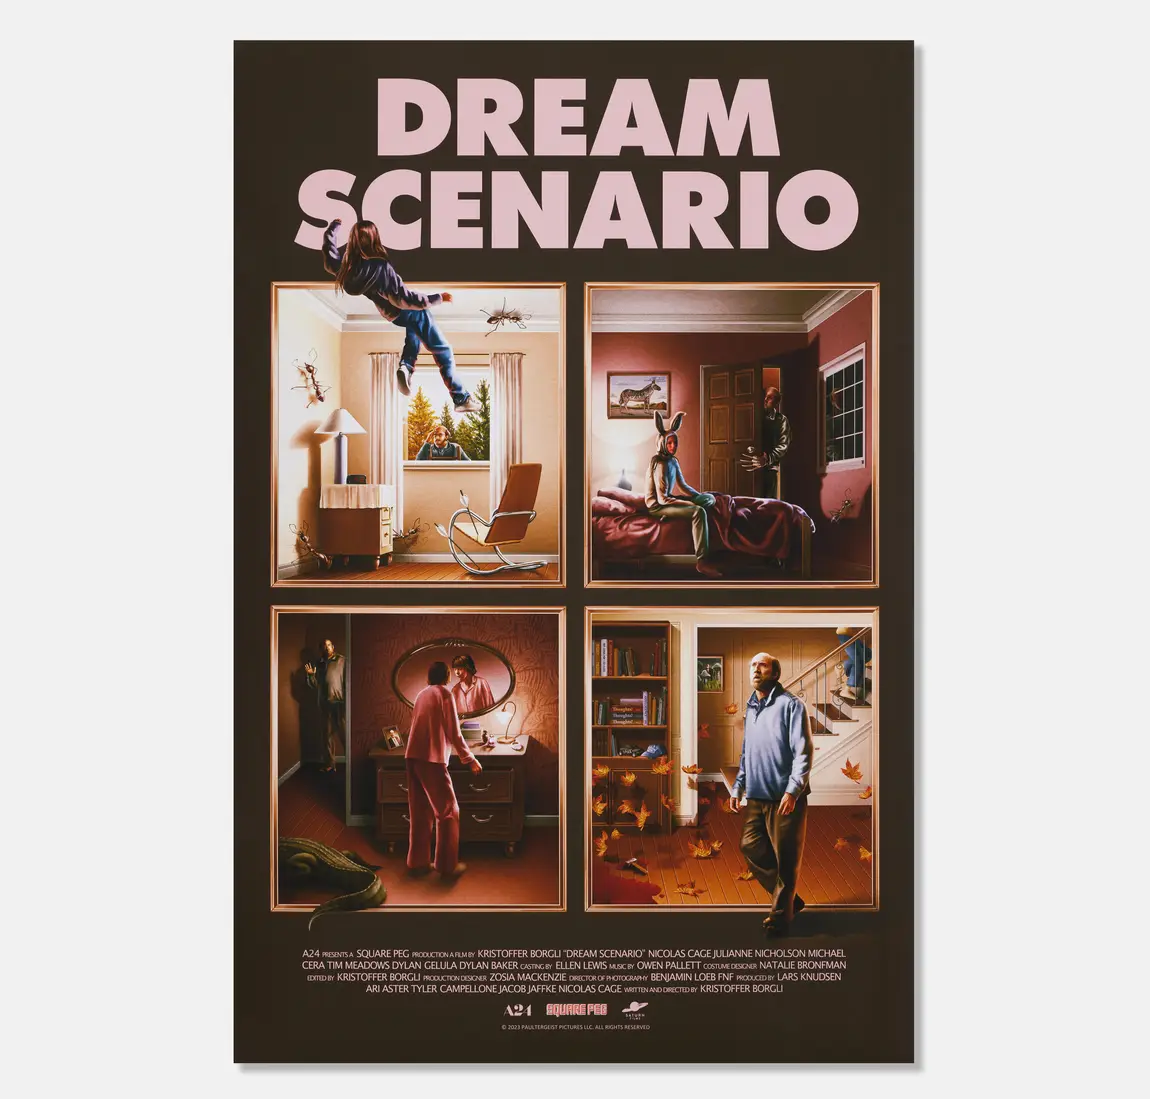 Poster+for+Dream+Scenario+starring+Nicholas+Cage+as+Paul+Matthews+%28bottom+right%29.+The+film+was+released+to+theaters+November+10th.